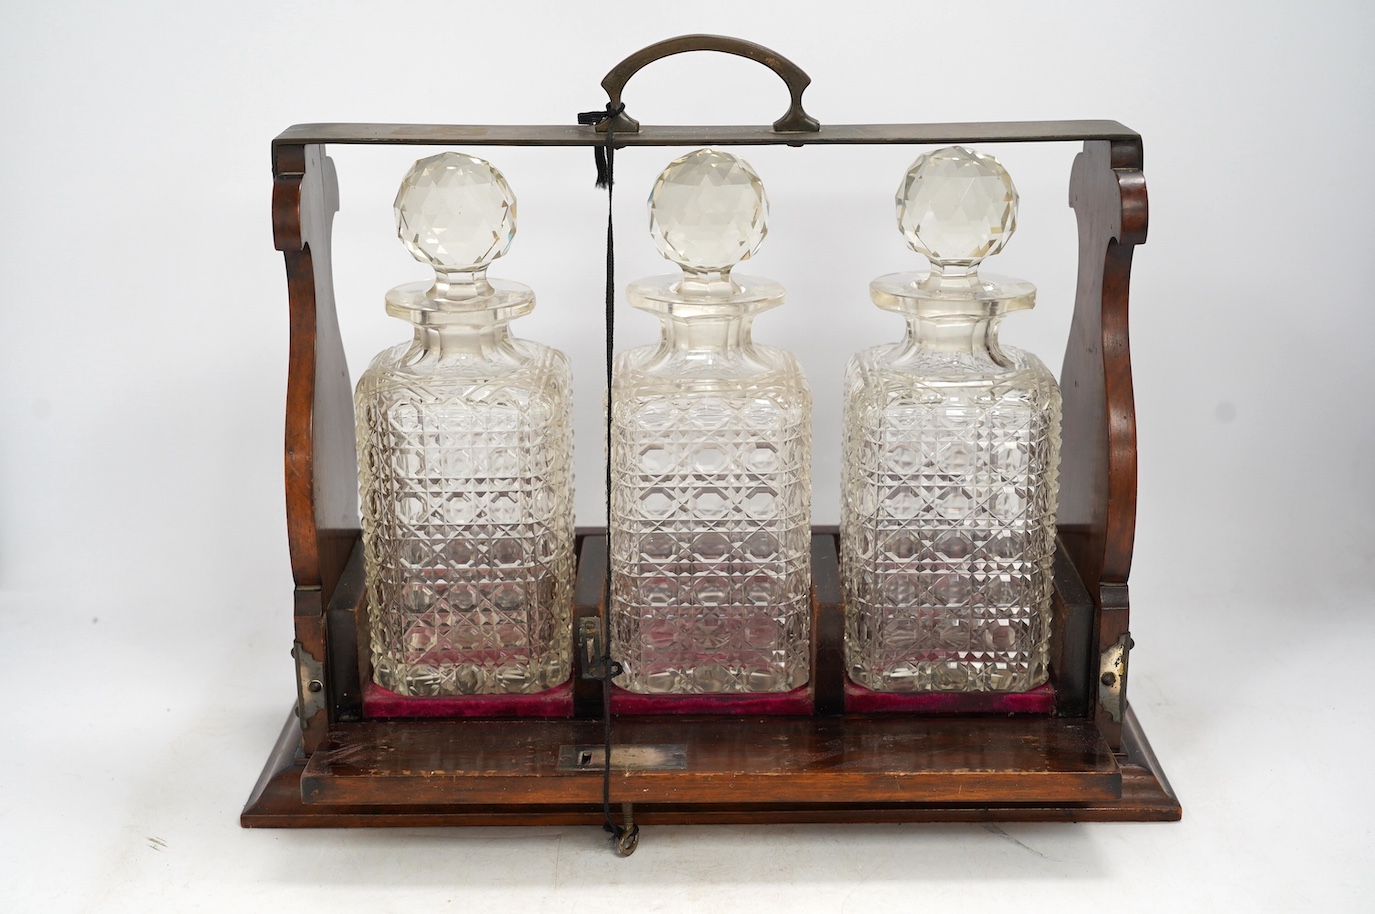 A three bottle tantalus with key, 38cm wide. Condition - fair, chipping to the stoppers